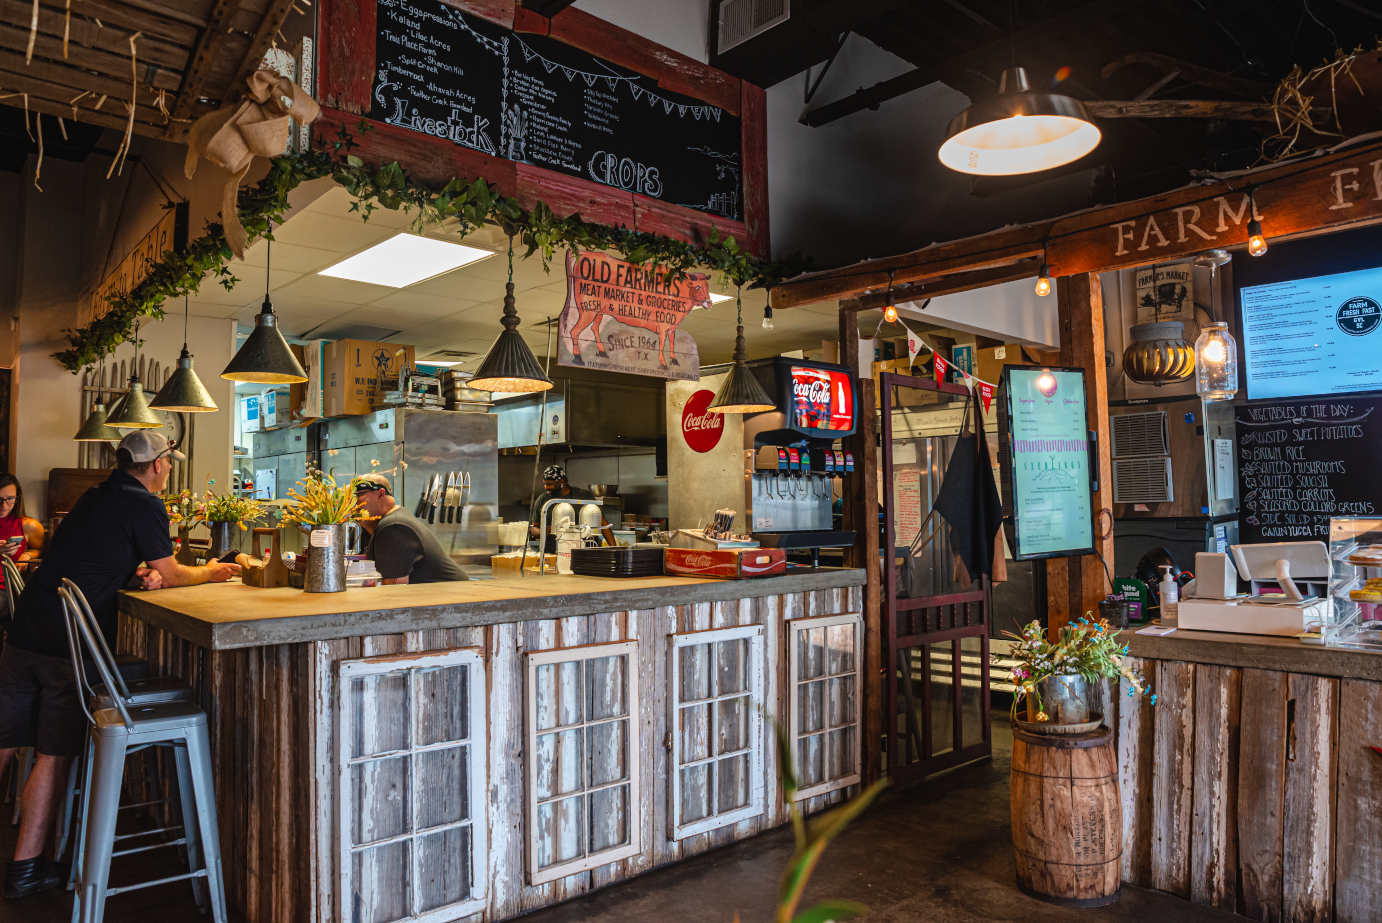 Interior, rustic ambience, food counter